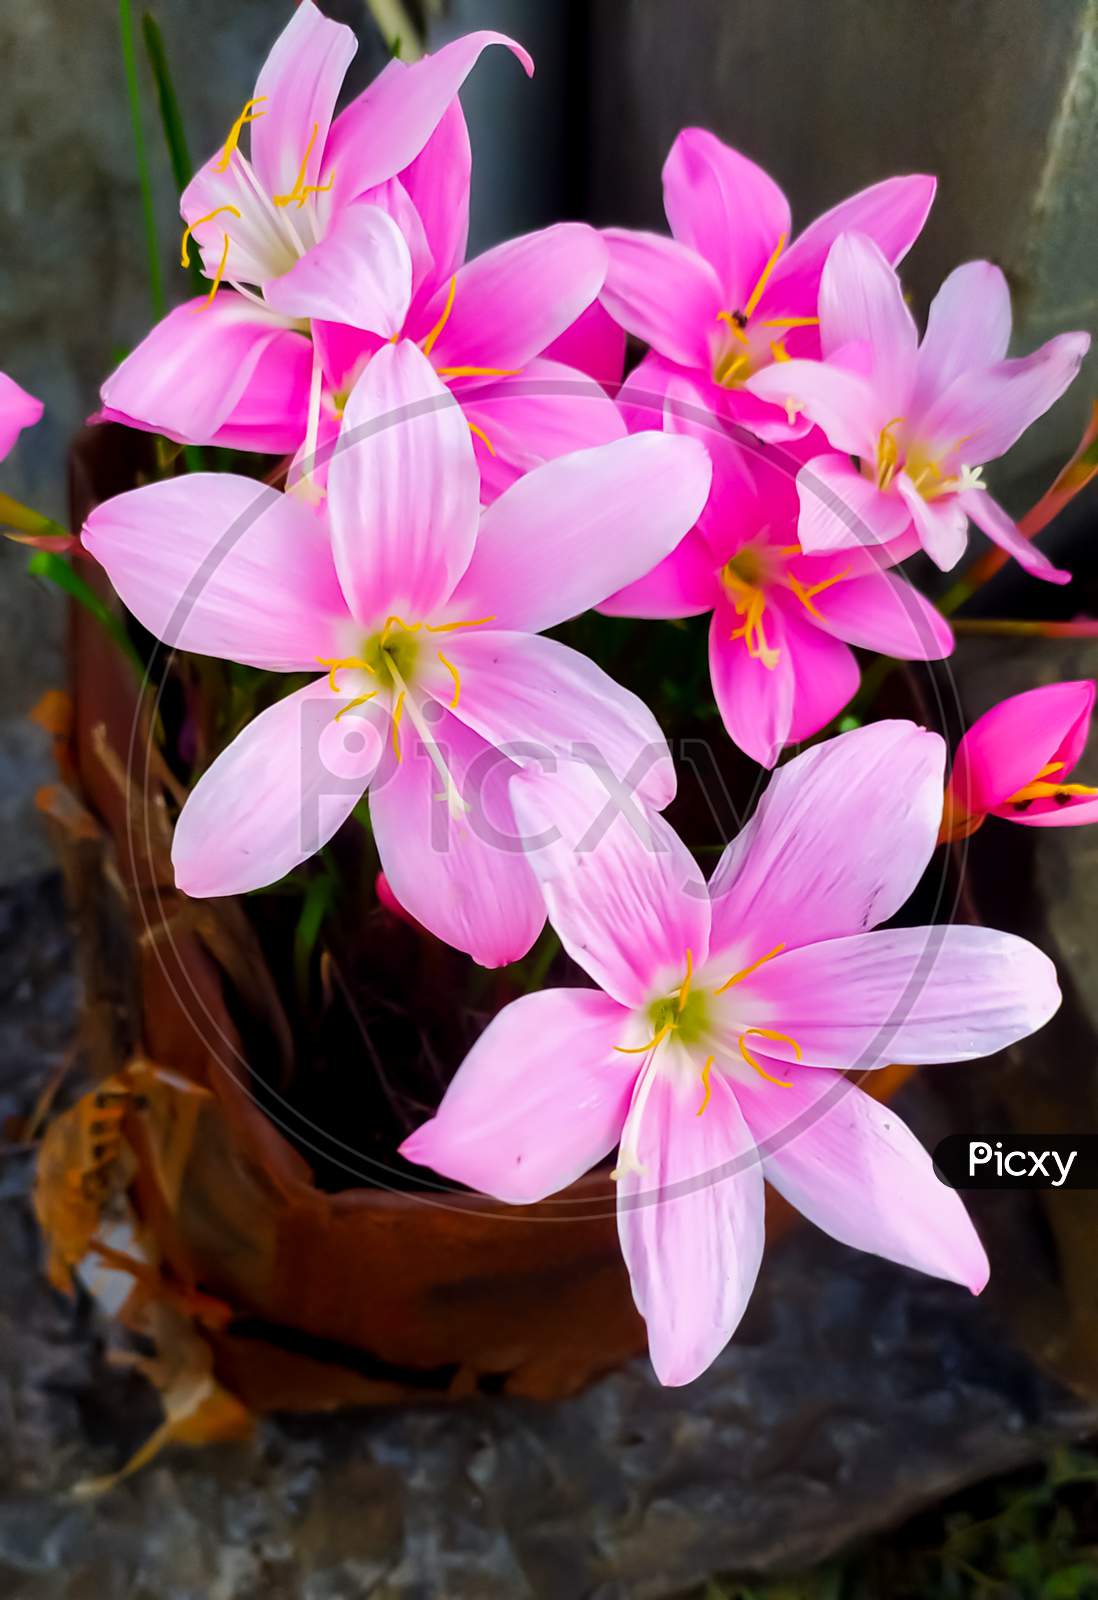 Pink rain lily flowers in cool garden